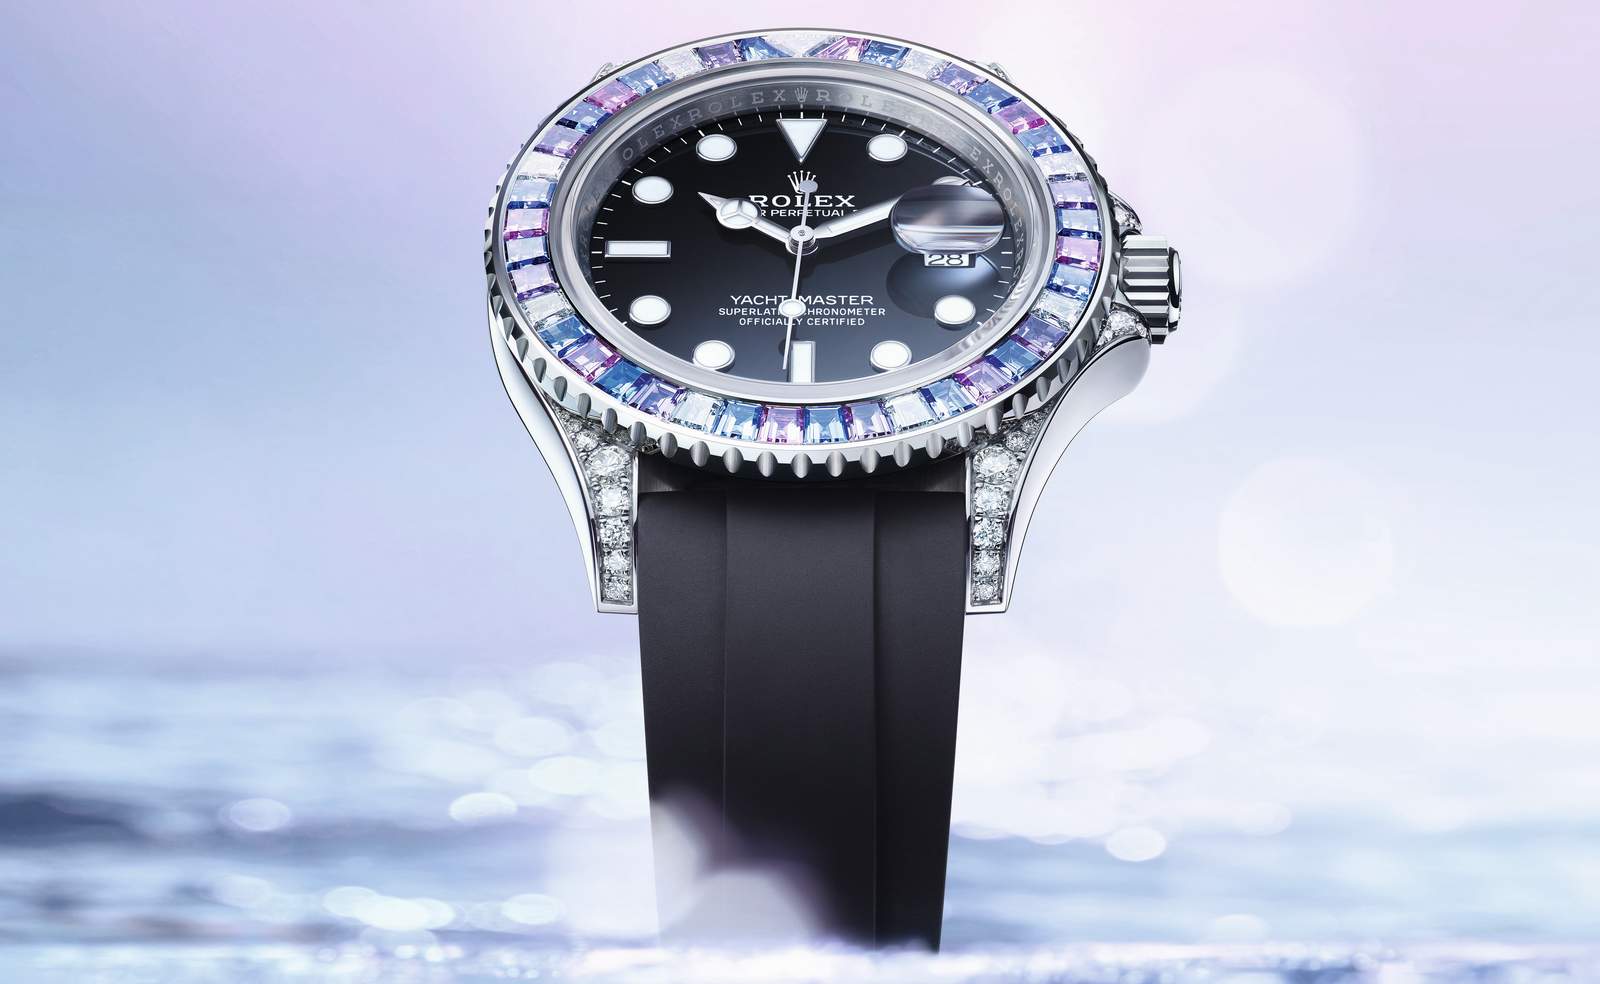 The New Rolex Oyster Perpetual Yacht Master Gets An Ct White Gold